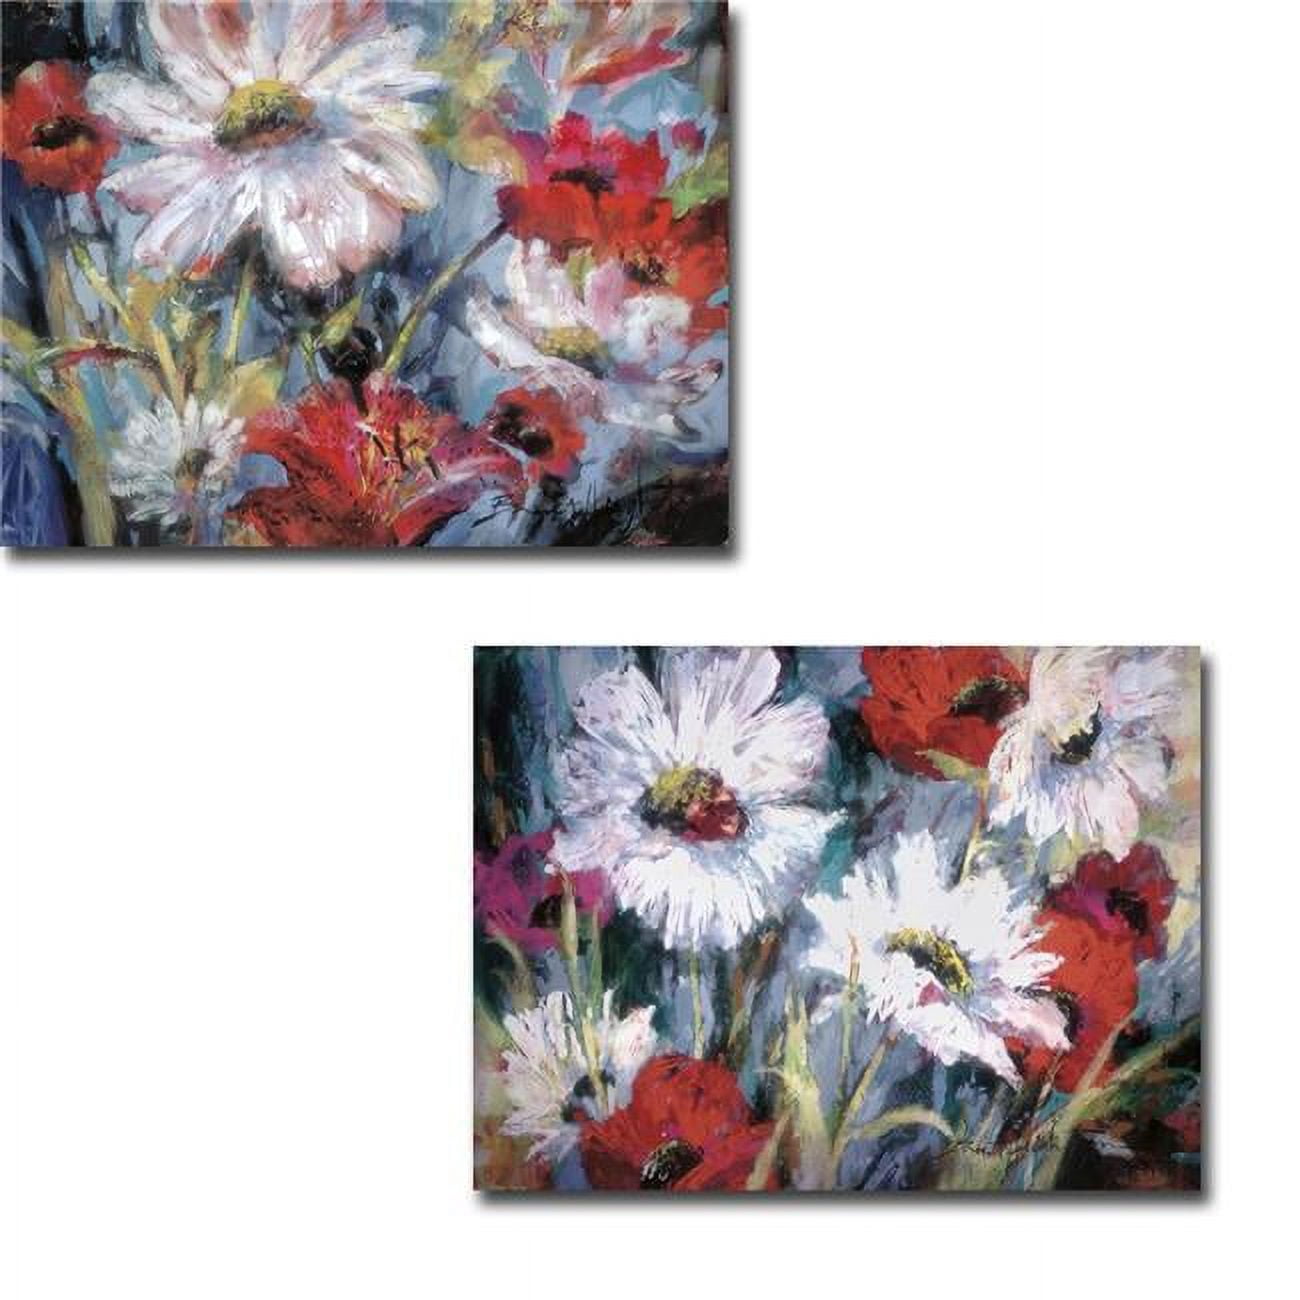 1216pj277cg Tangled Garden I & Ii By Brent Heighton 2-piece Custom Gallery-wrapped Canvas Giclee Art Set - 12 X 16 X 1.5 In.